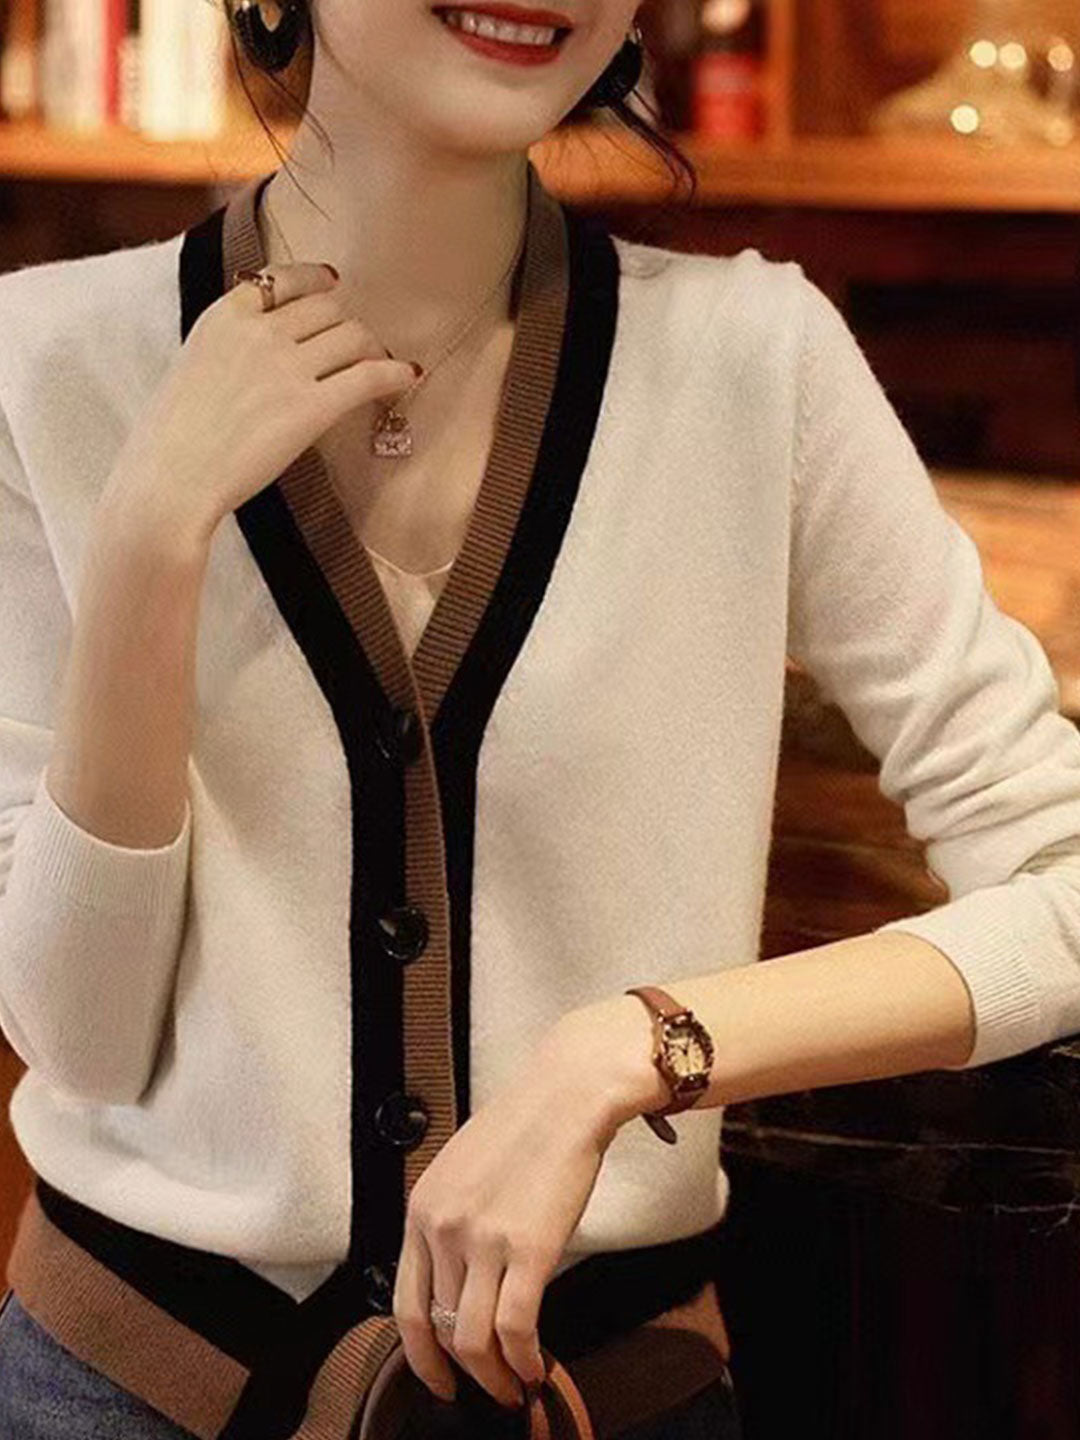 Anna Casual V-Neck Color Block Knitted Cardigan